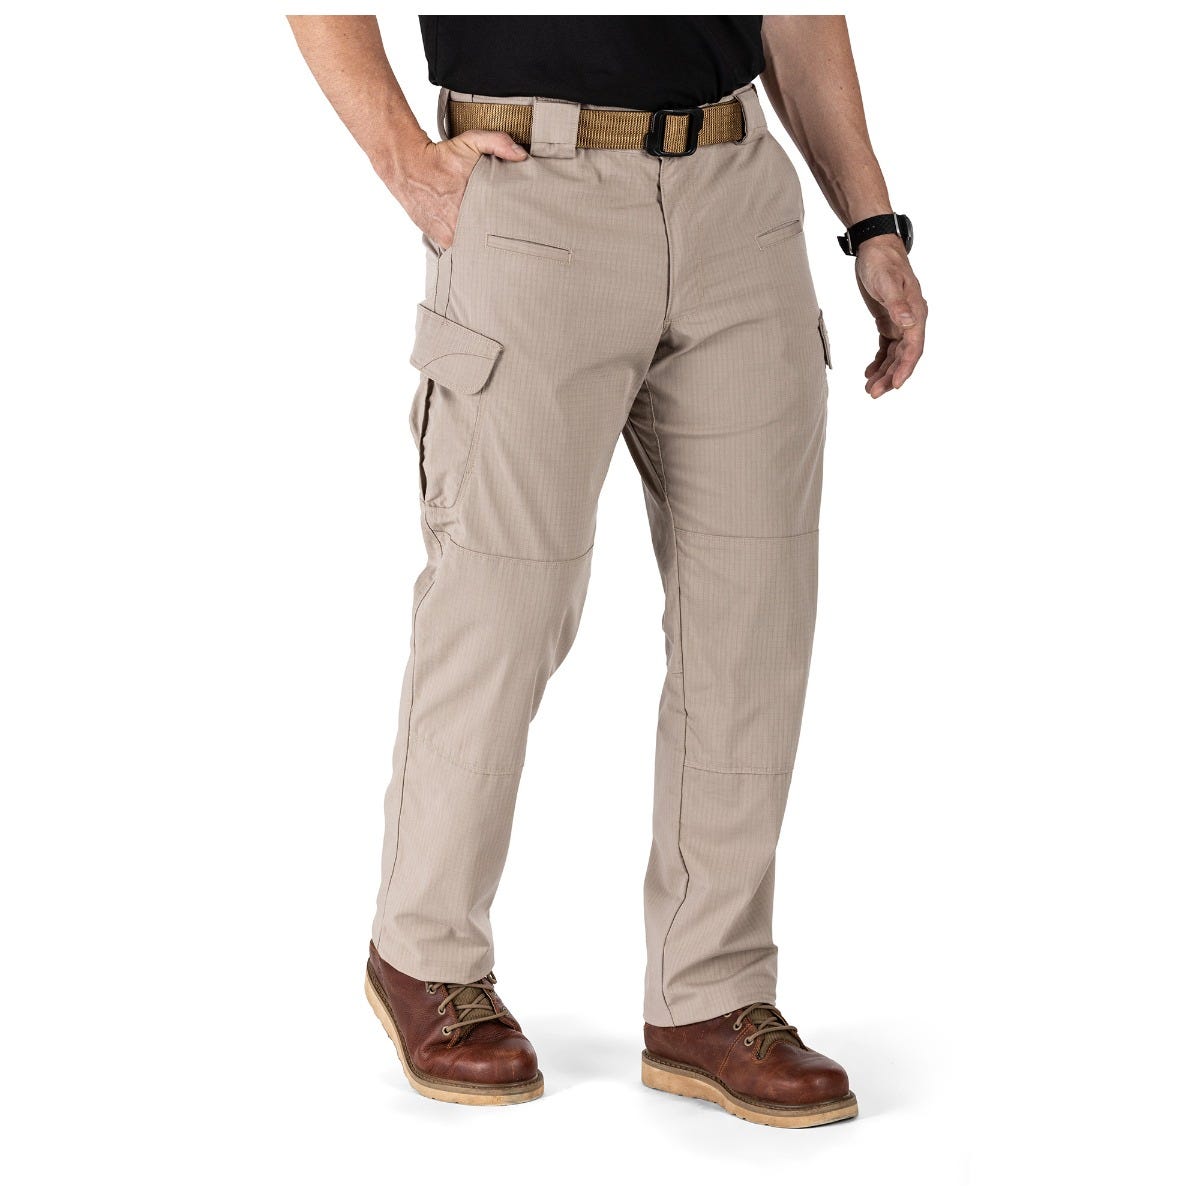 Key Area Reinforcements Pant: Adds strength and longevity for rigorous use.